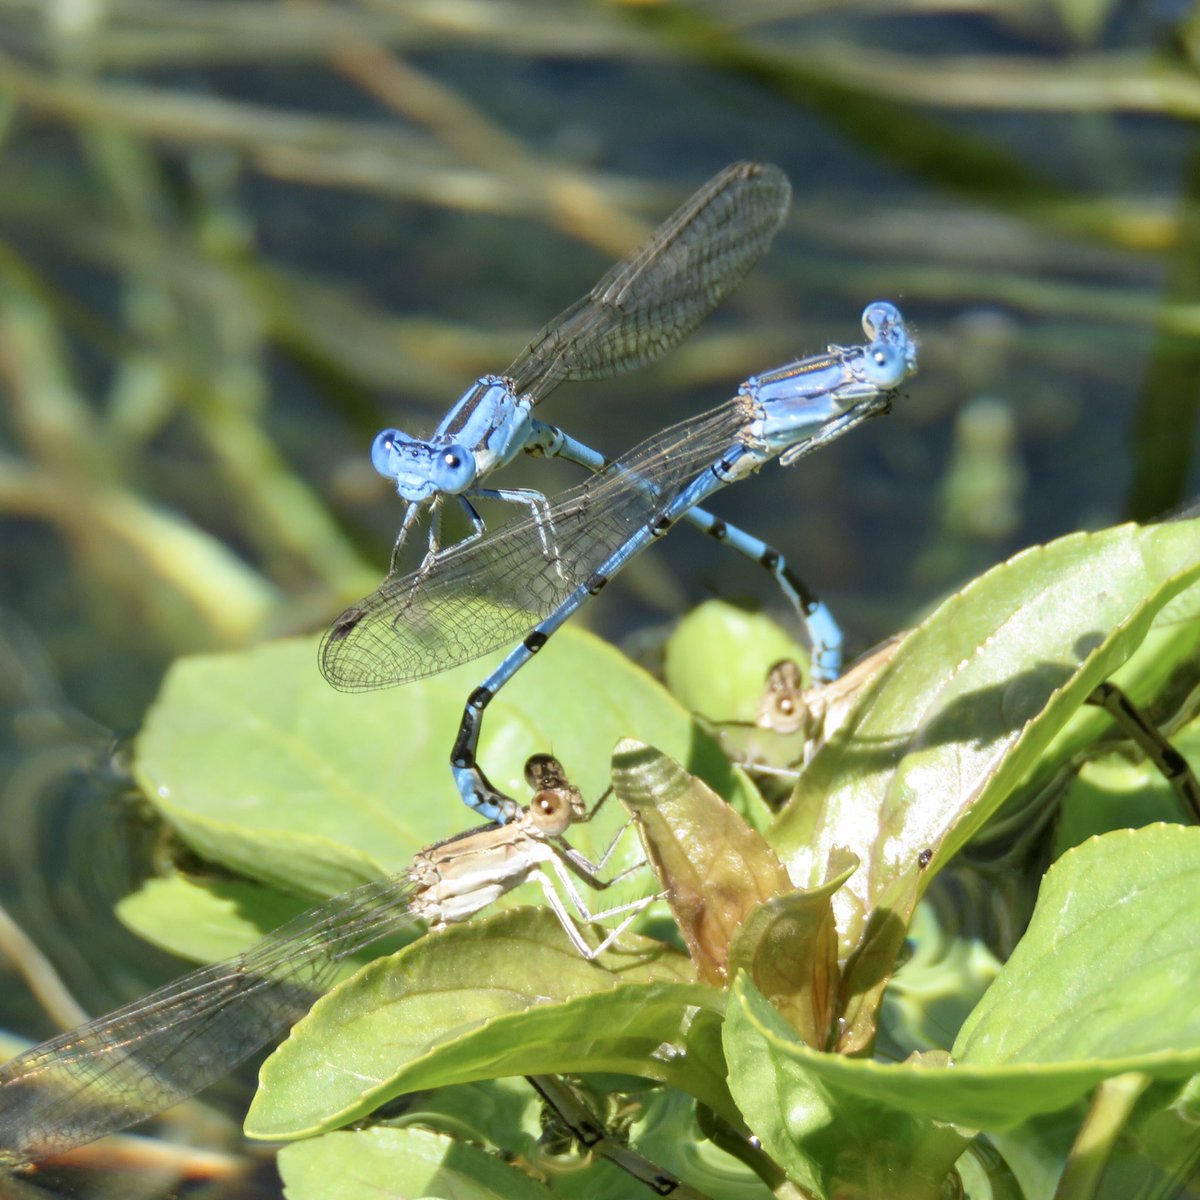 Two pairs of Aztec dancer (Argia nahuana) damselflies — the females laid eggs in the Santa Cruz River as the bright blue males guarded them from above  #Tucson  #doubledate